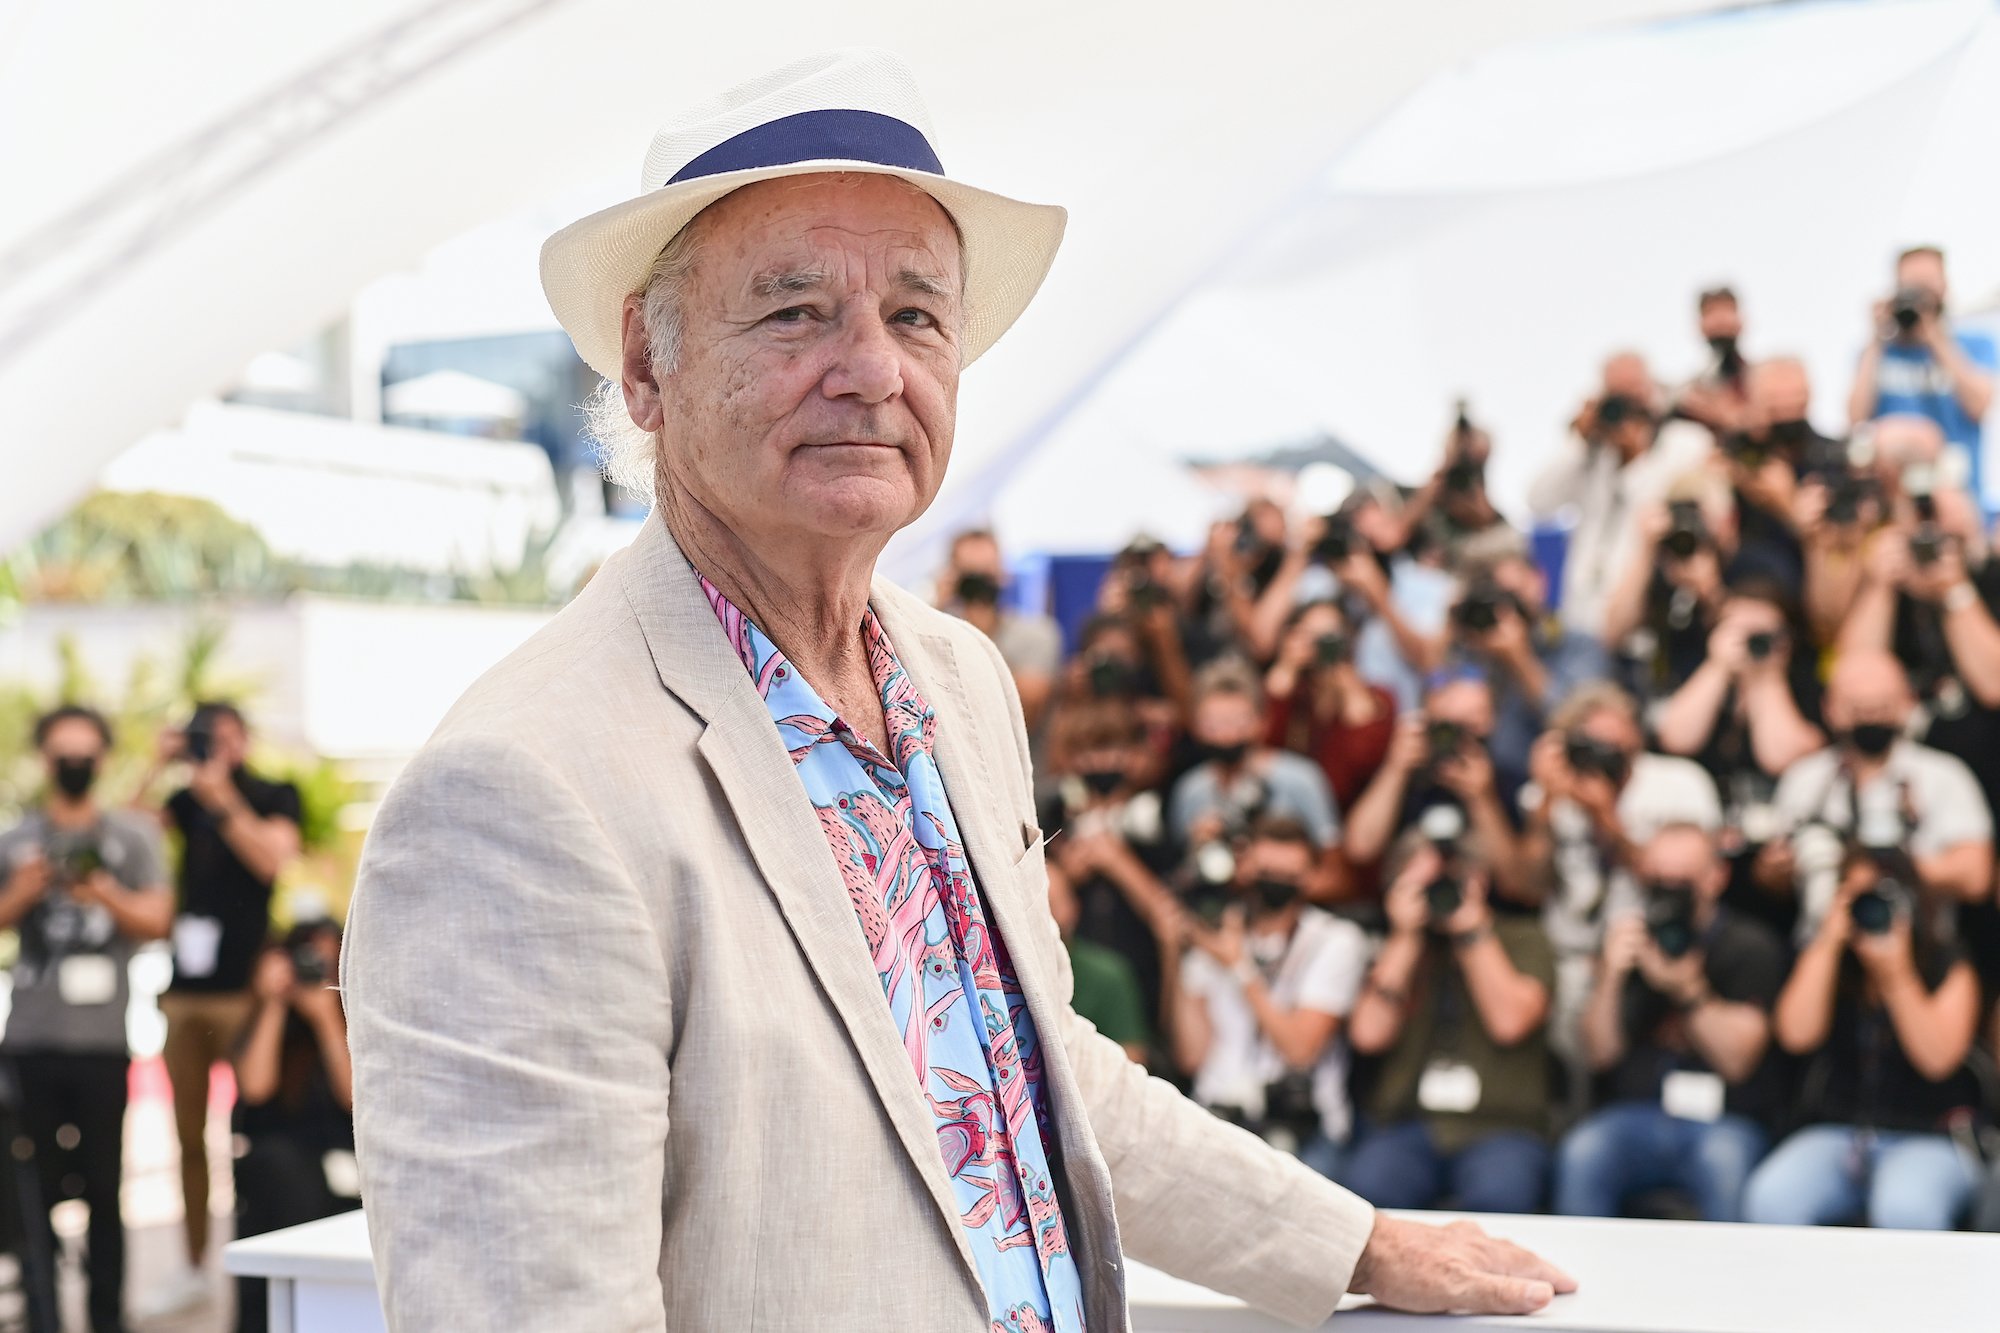 Bill Murray attends the "New Worlds: The Cradle Of Civilization" photocall during the 74th annual Cannes Film Festival on July 16, 2021 in Cannes, France.